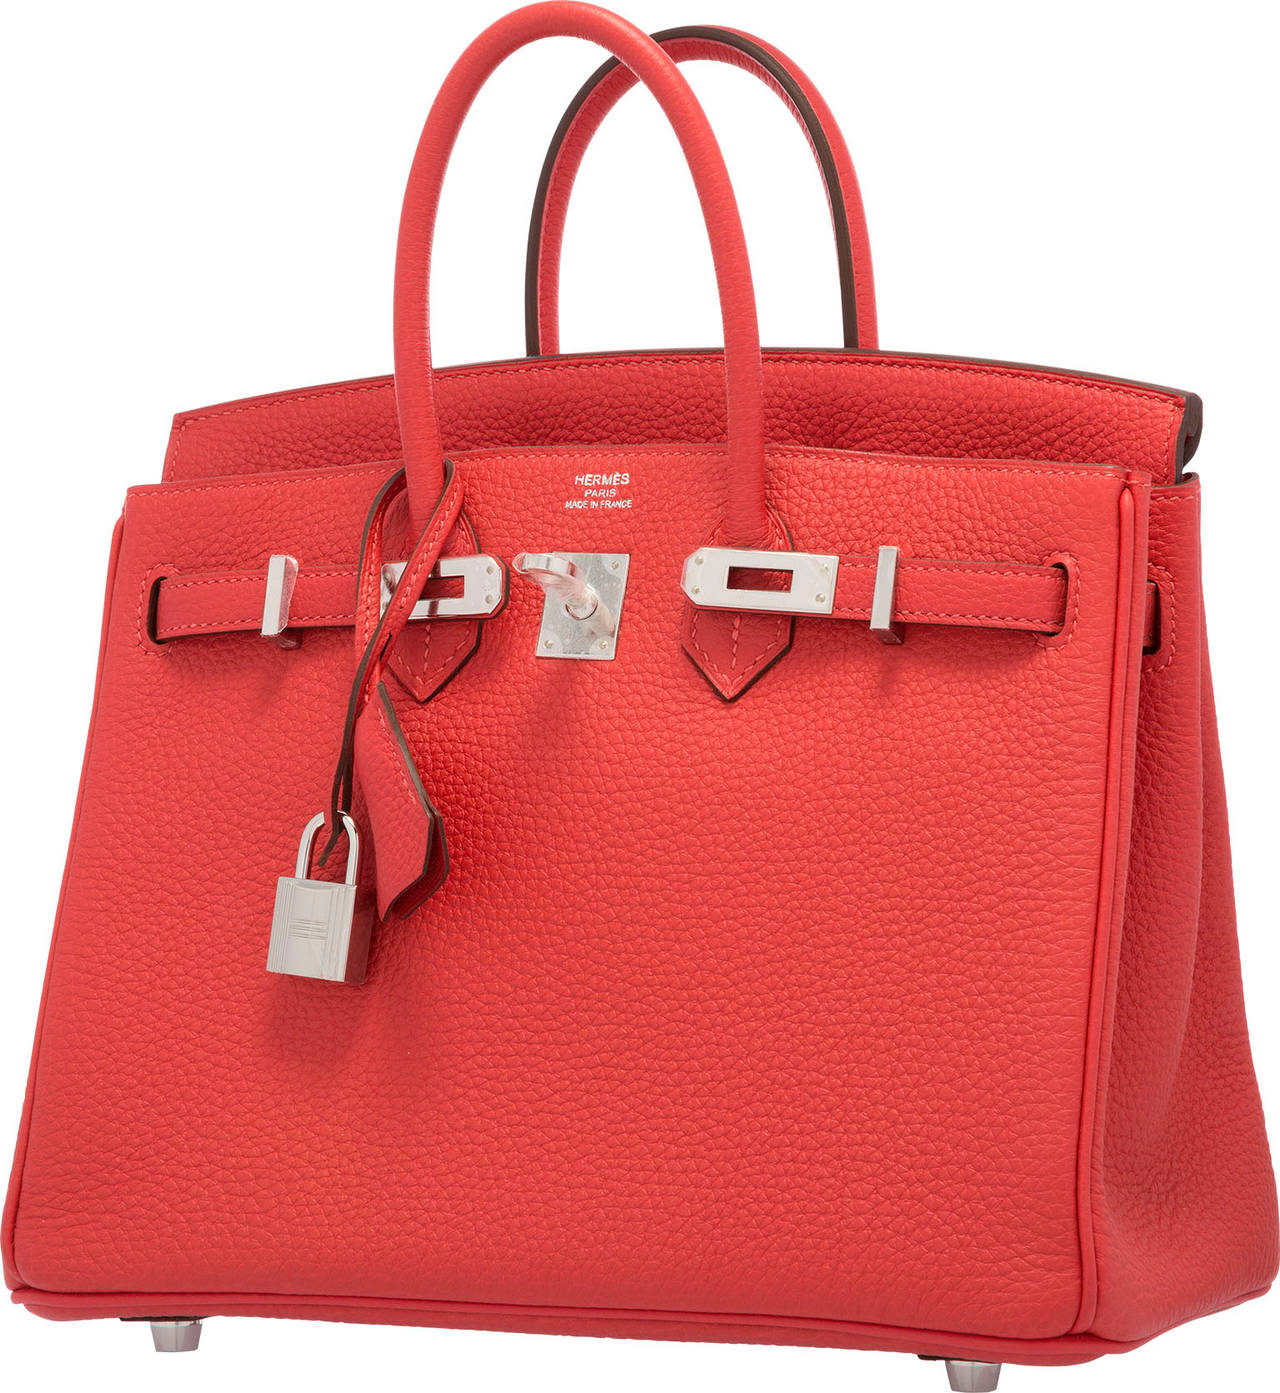 Rouge Pivoine, taking its name after the vibrant Peony flower, is a new coloration from Hermes that has rarely been seen, and is highly sought after for its vivid coloration and radiant glow. This Birkin is done in Rouge Pivoine Clemence Leather, a